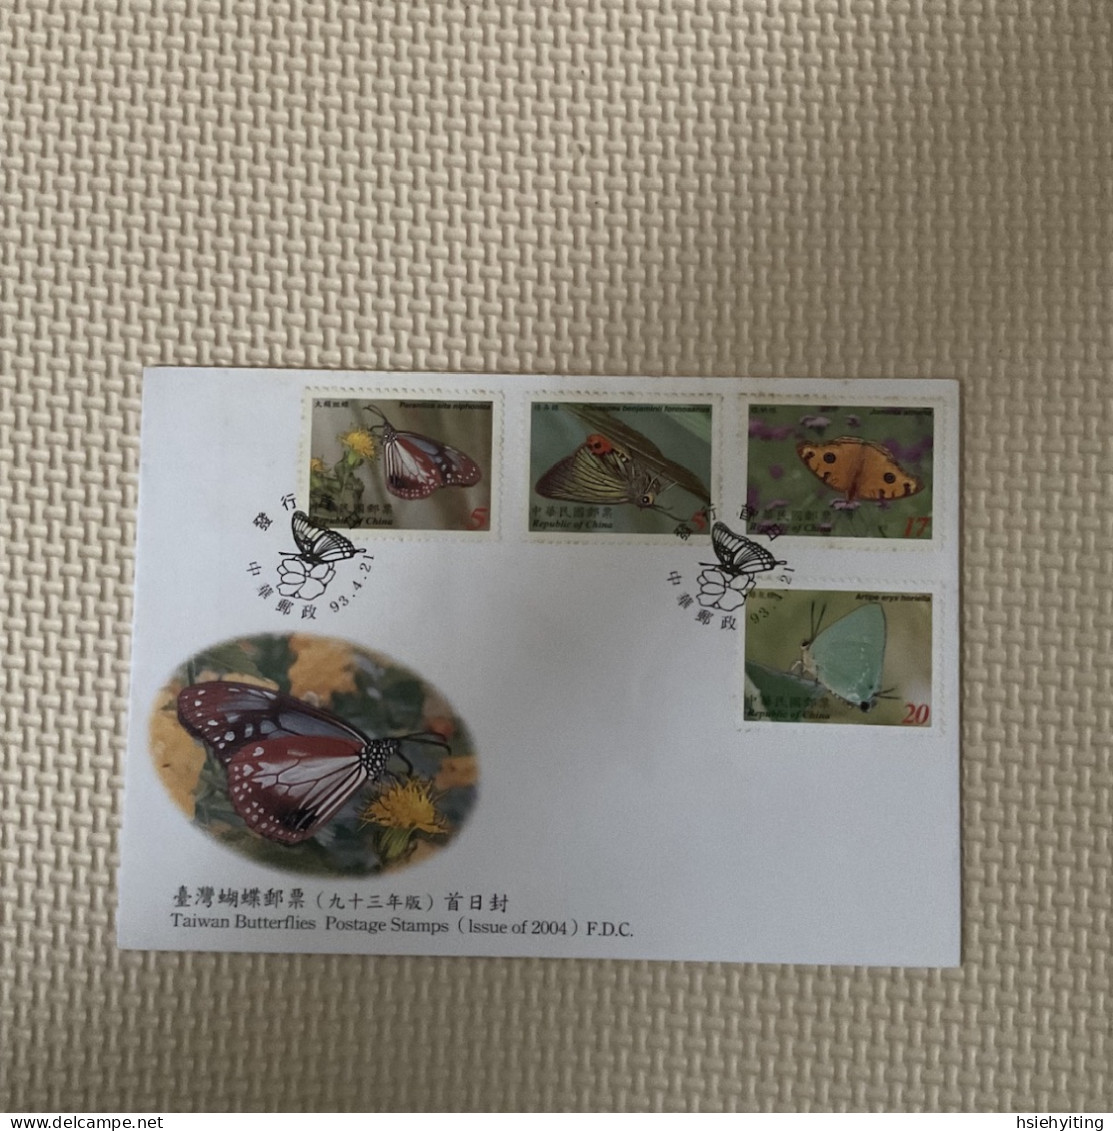 Taiwan Postage Stamps - Butterflies